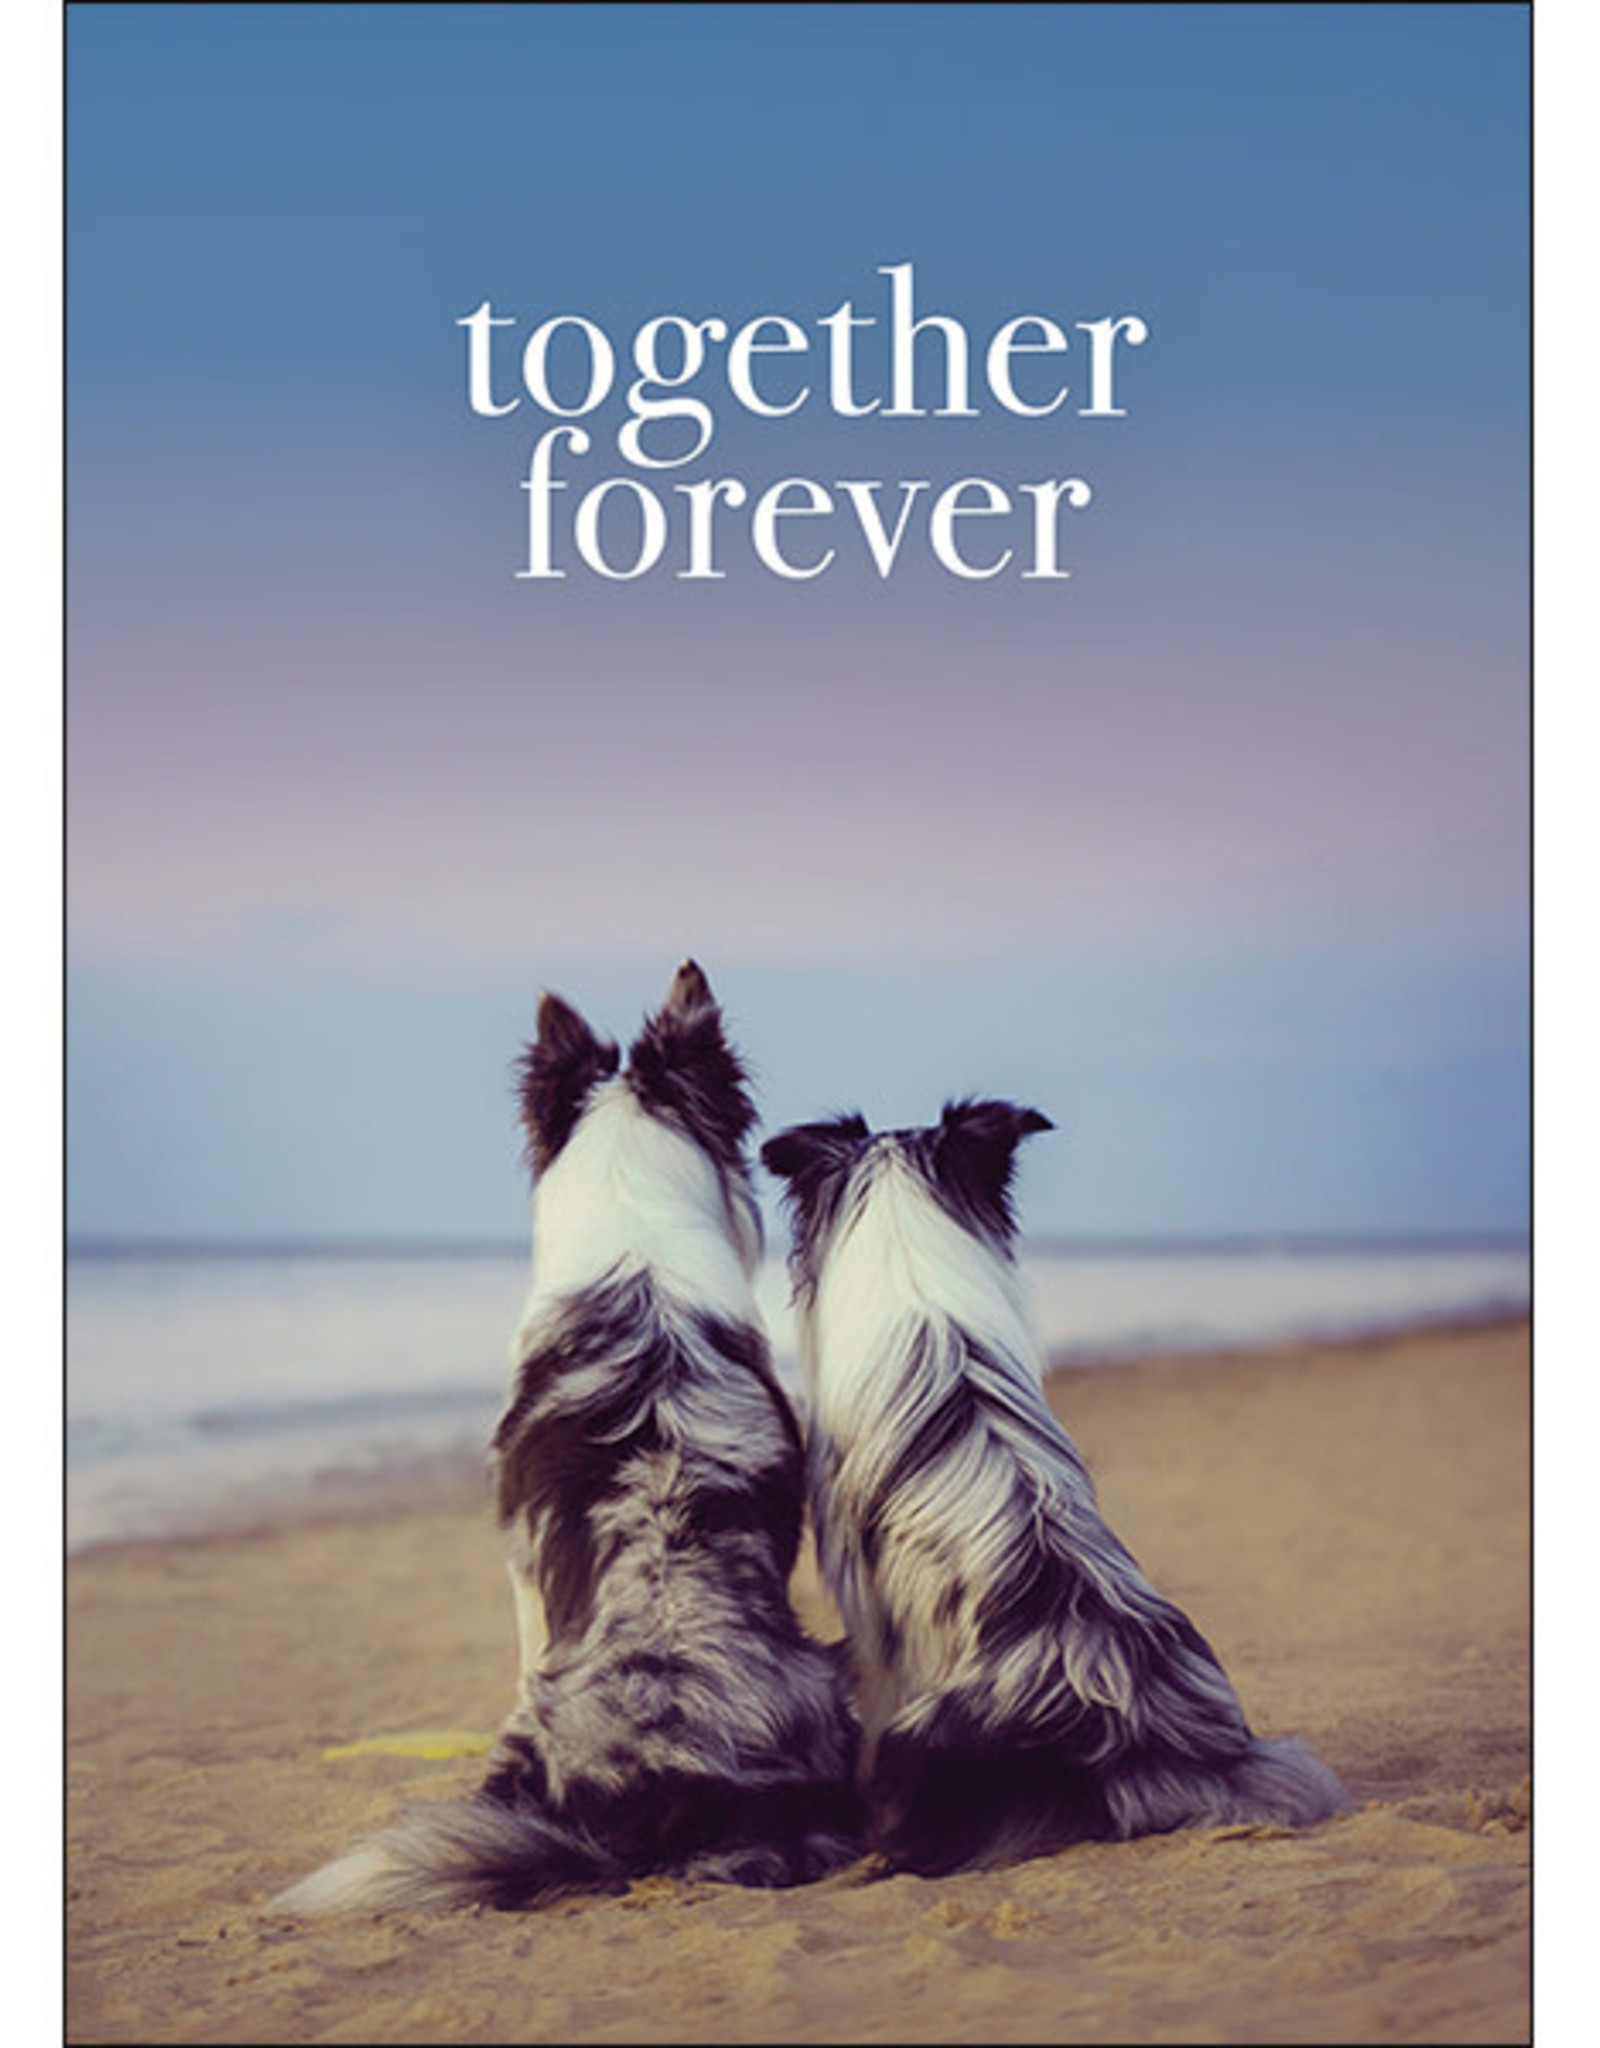 Affirmations Publishing House Together Forever Greeting Card